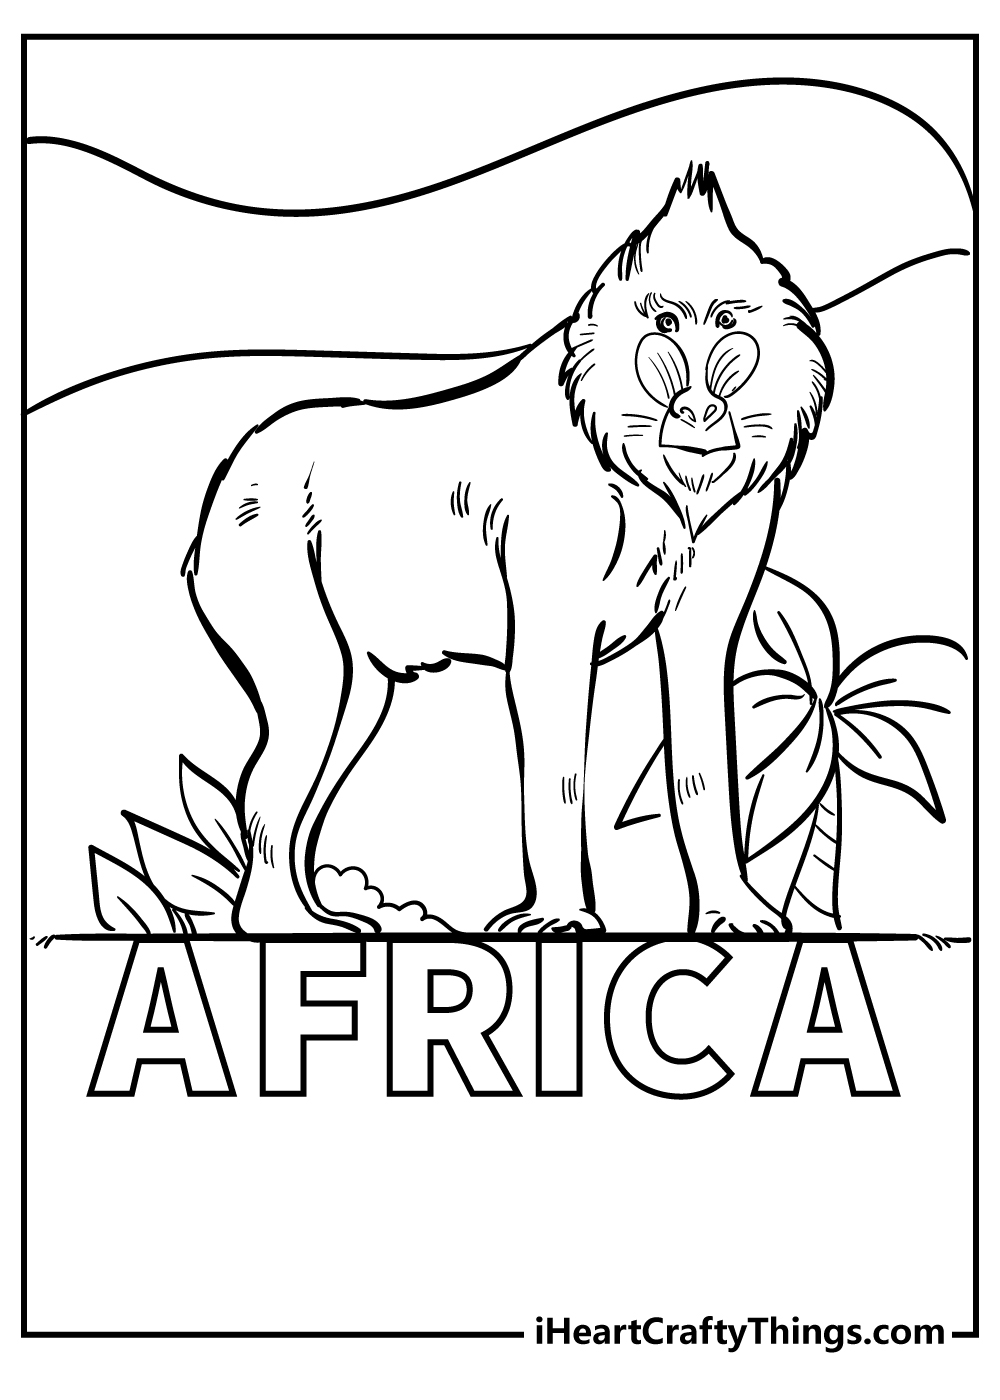 Africa Coloring Book for kids free printable